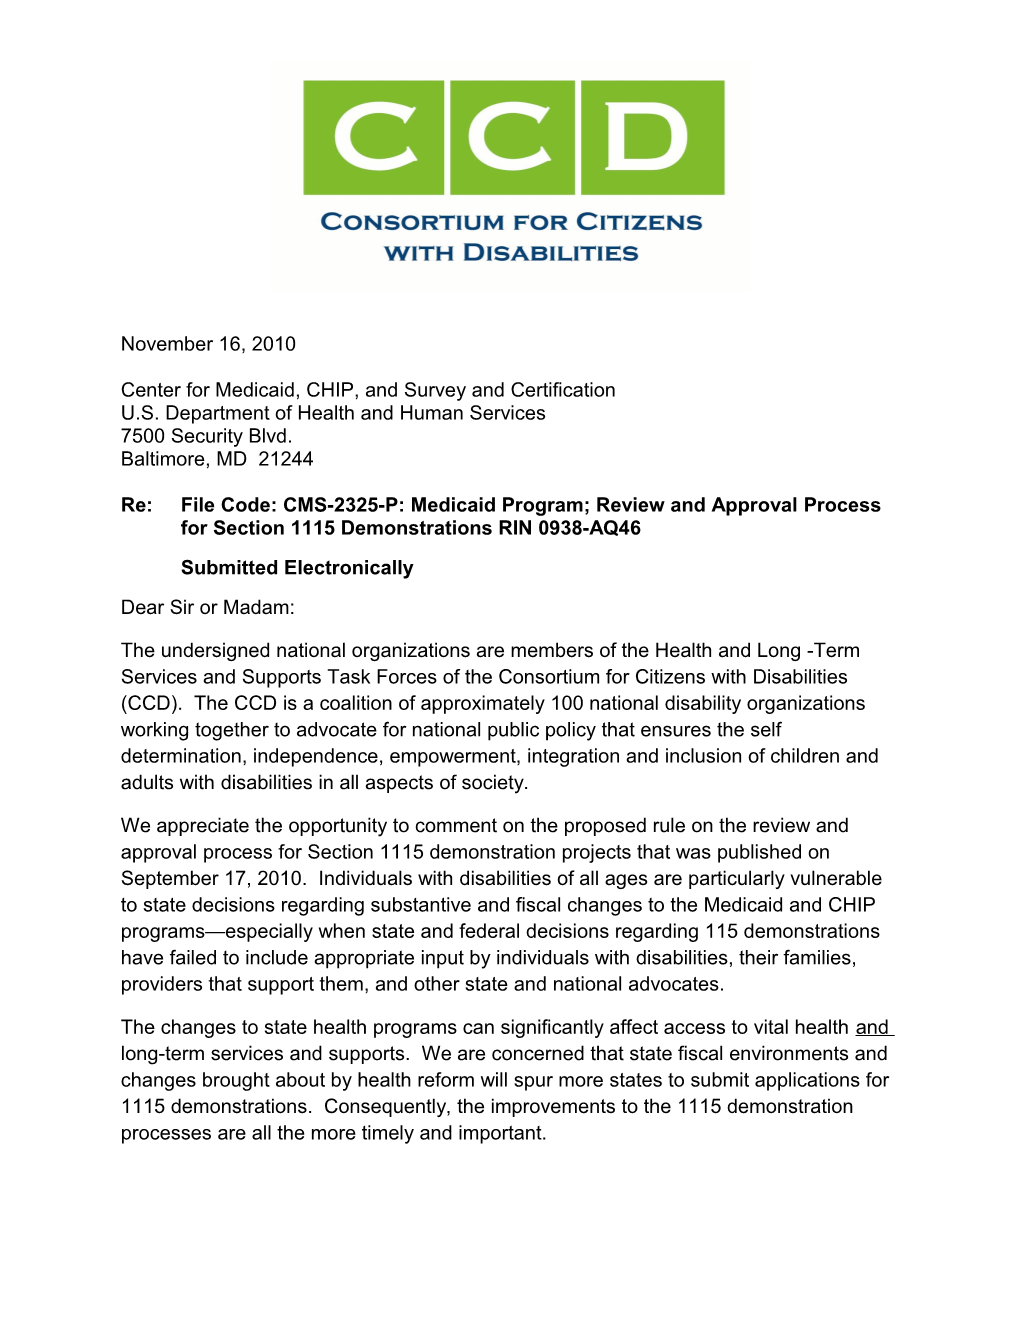 CCD Letter of Support (D0335850)